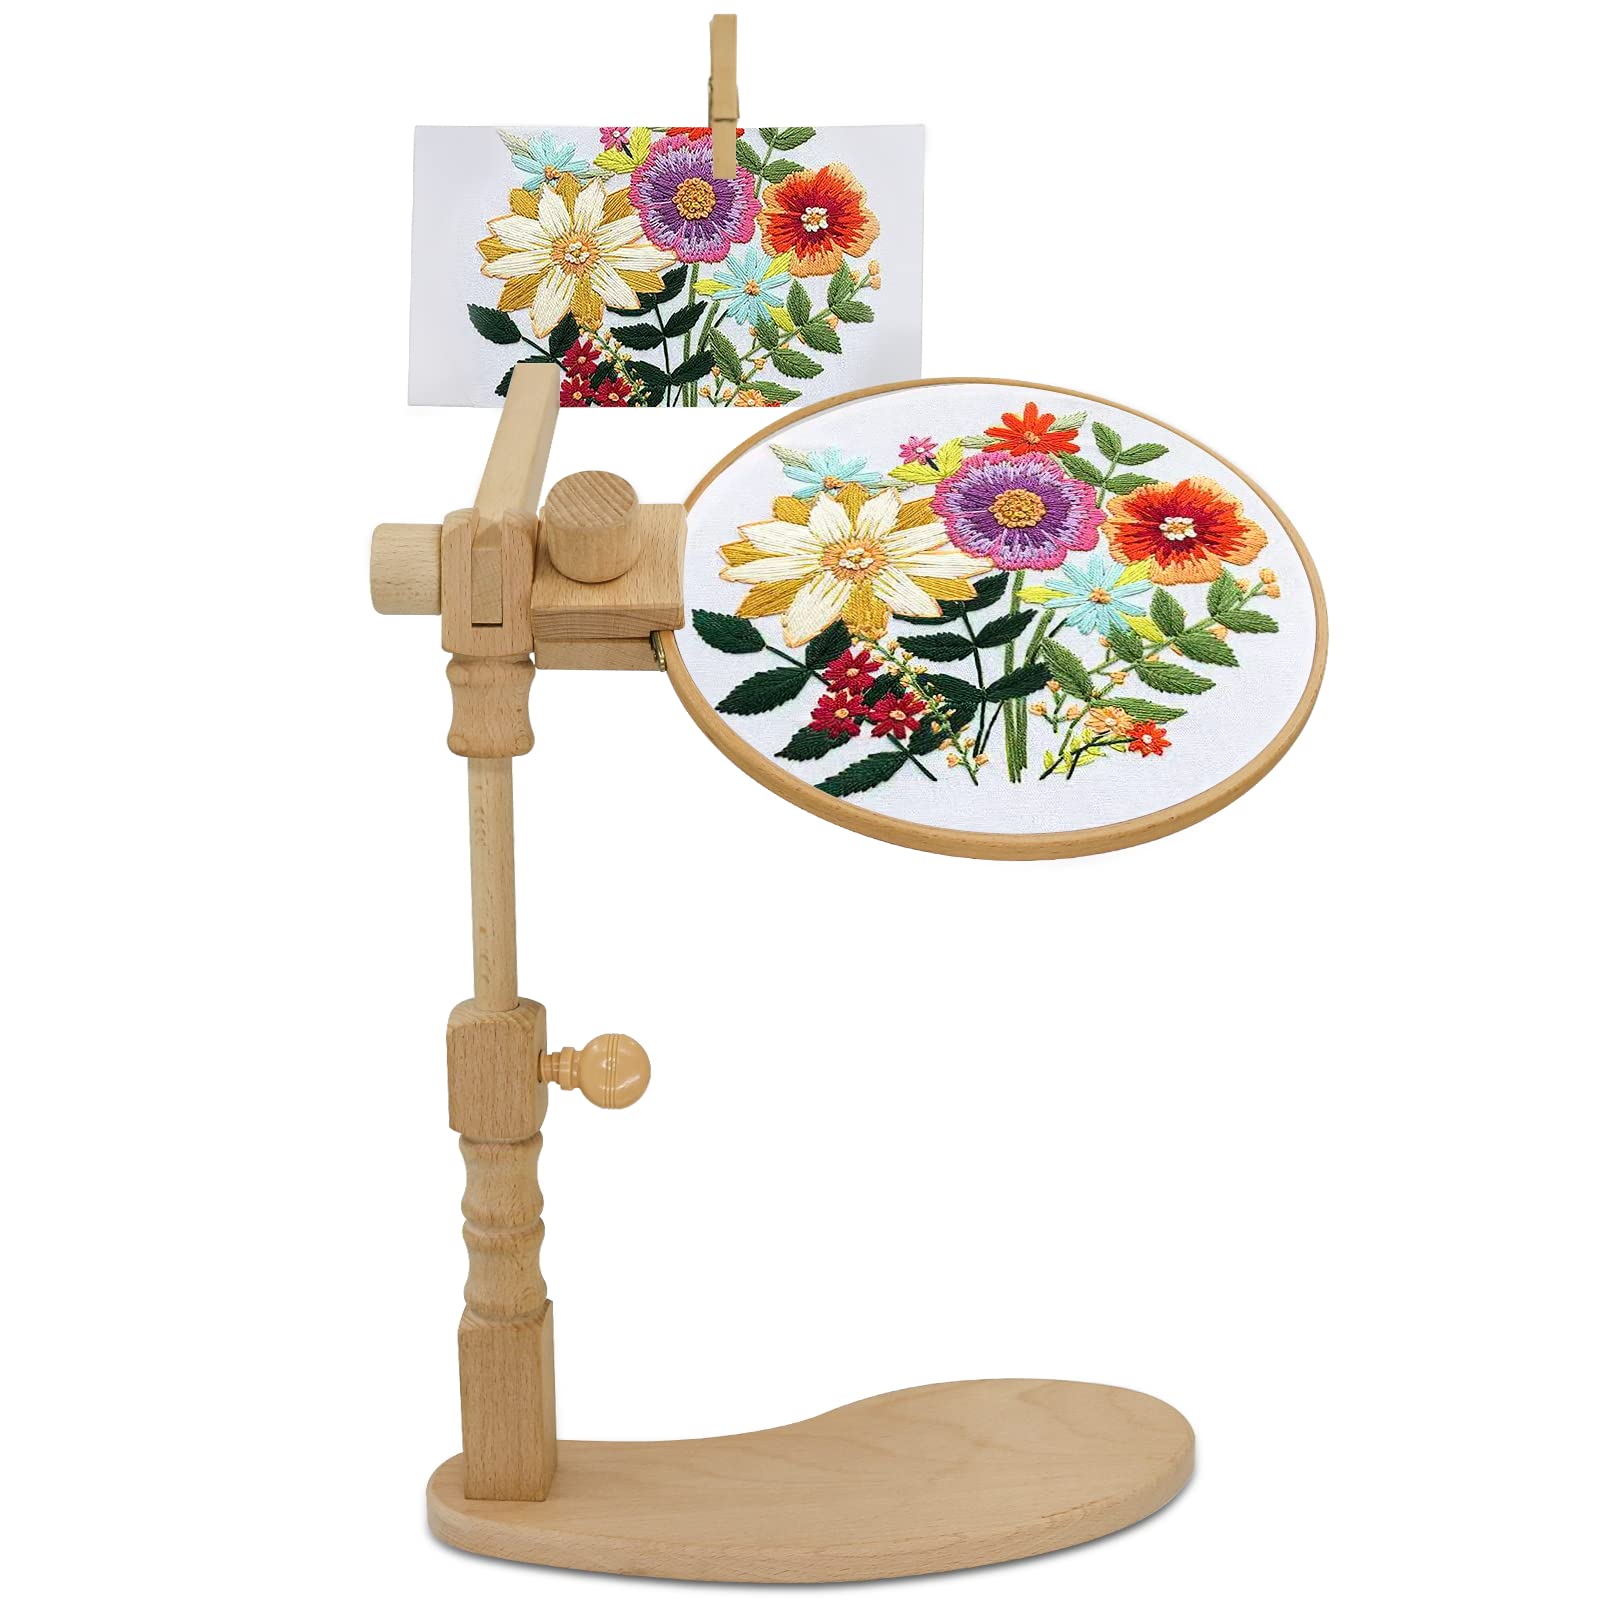 Embroidery Scroll Frame Lap Stand (2P) Adjust Cross Stitch Frame Stand  Rotated Lap Embroidery Stand Lap ,Embroidery Scroll Frame Suitable for  Cross